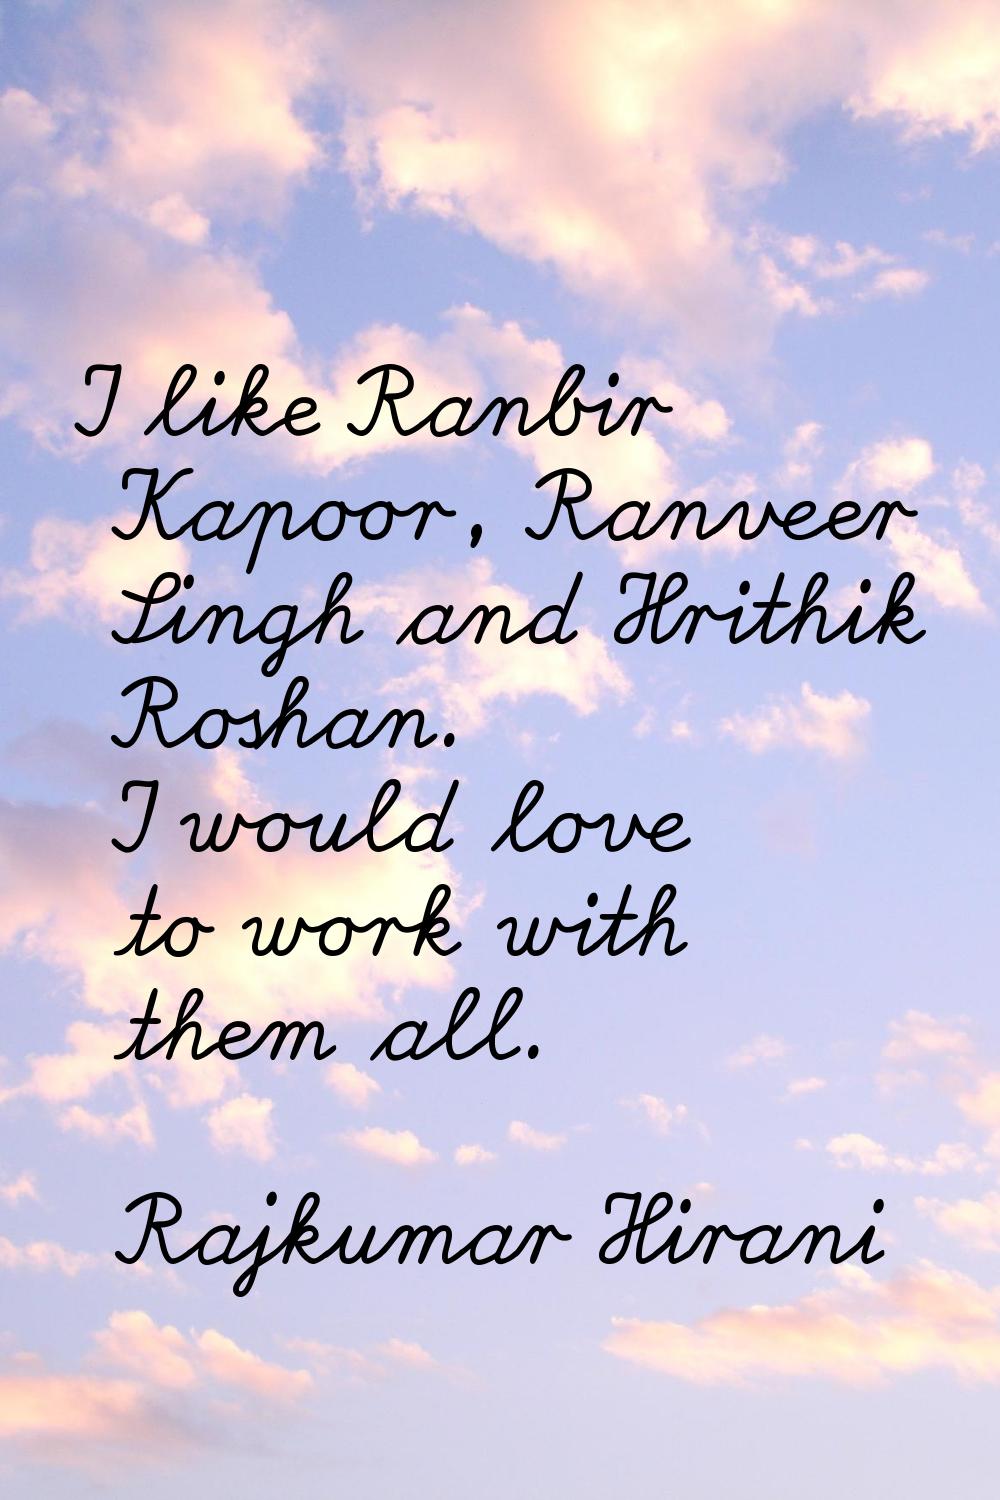 I like Ranbir Kapoor, Ranveer Singh and Hrithik Roshan. I would love to work with them all.